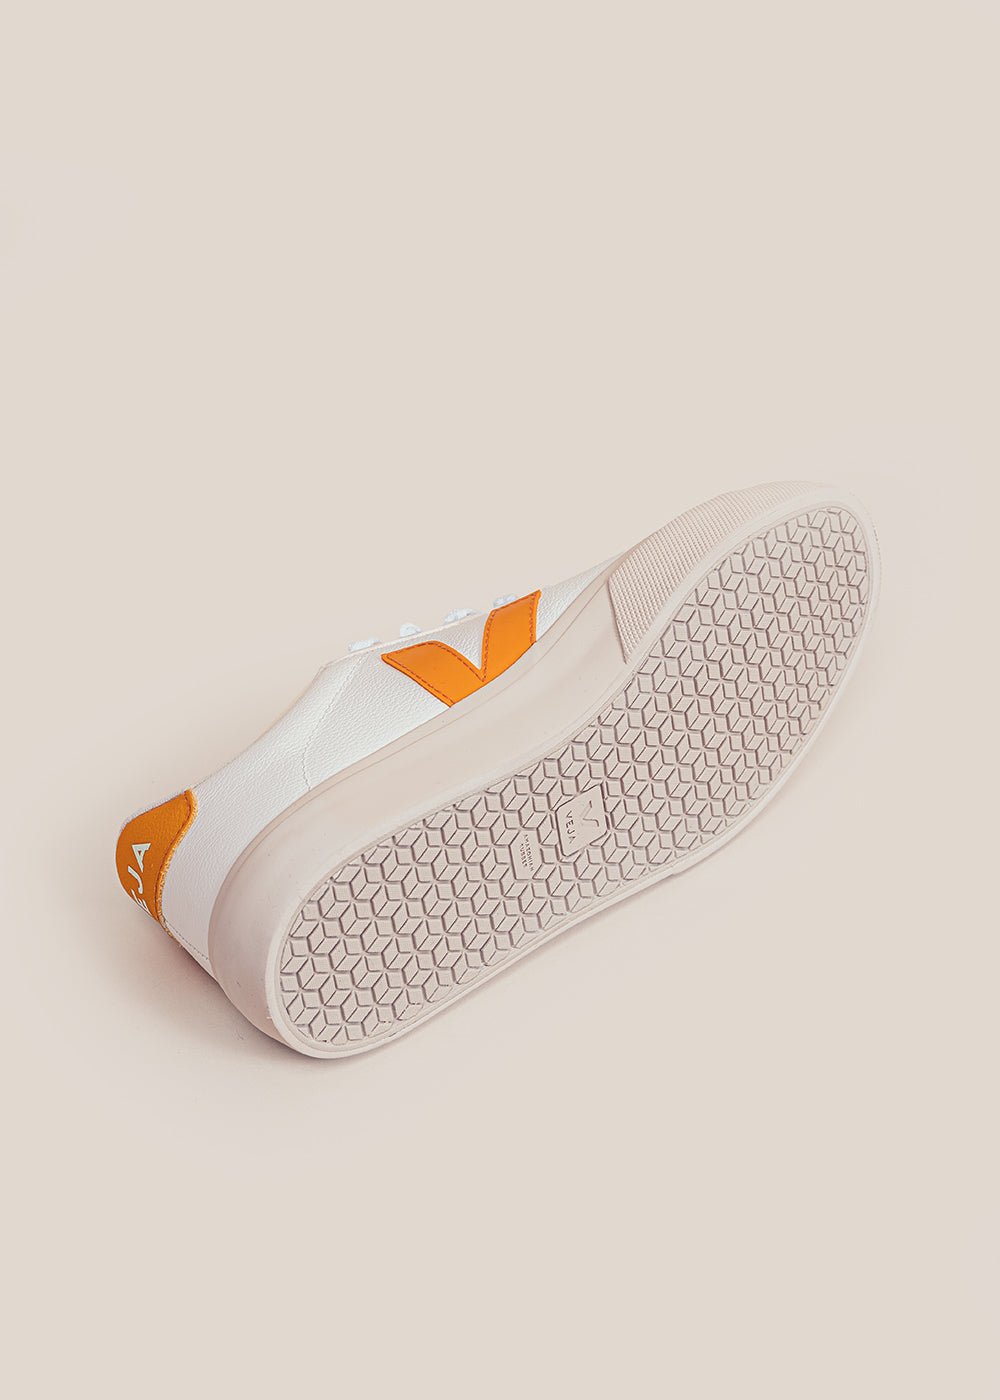 Veja White Ouro Campo Sneaker - New Classics Studios Sustainable Ethical Fashion Canada